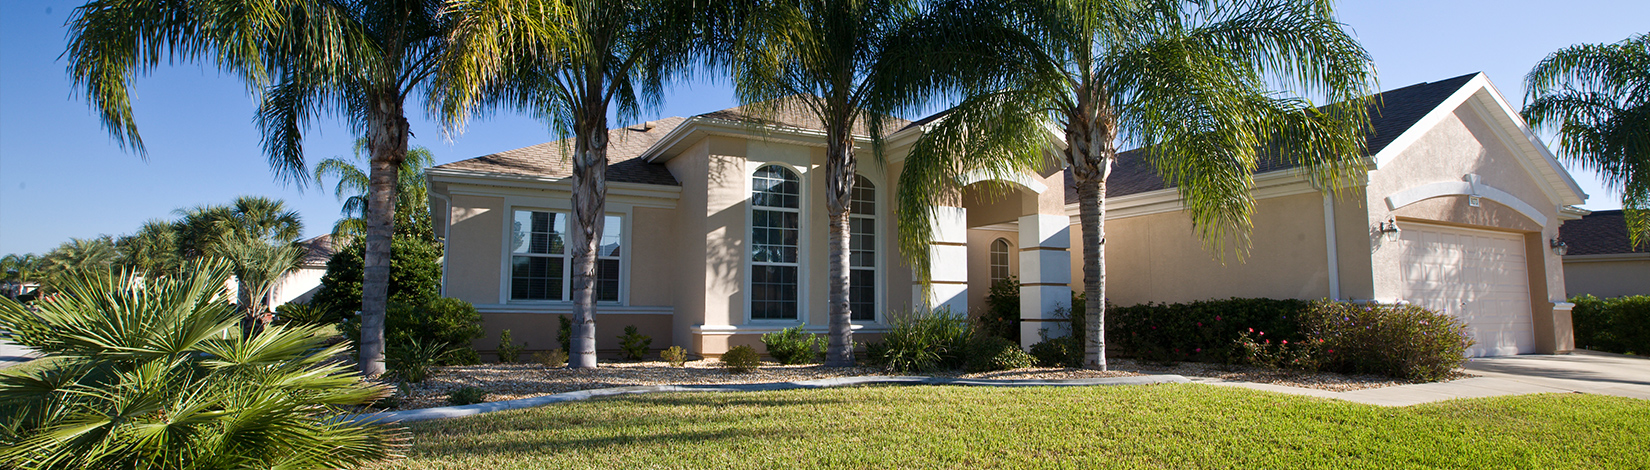 Florida house with queen palms